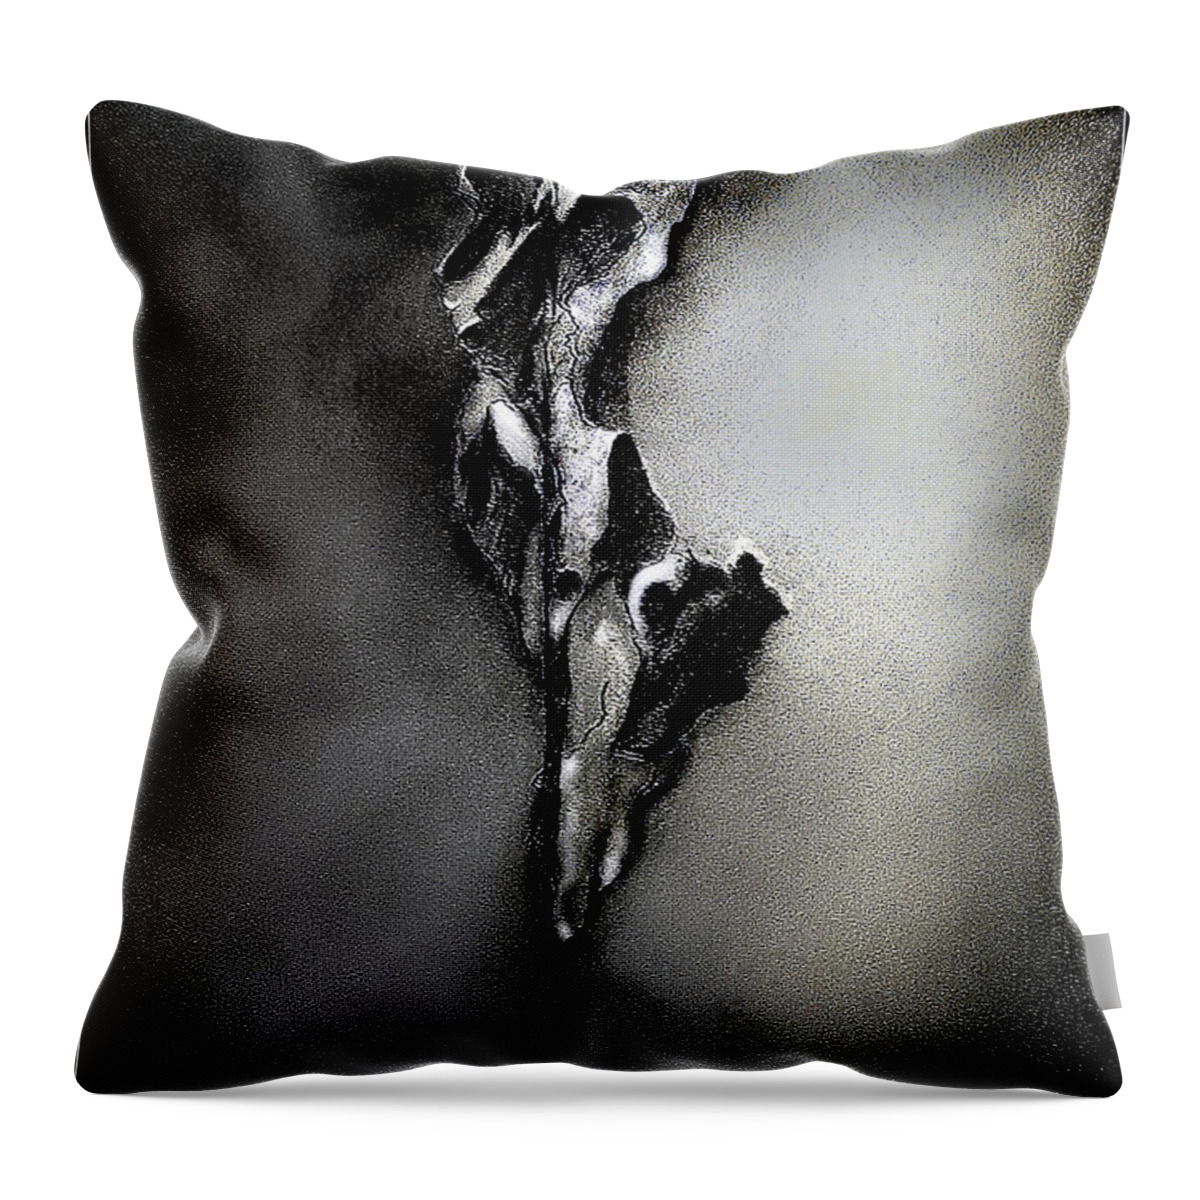  Throw Pillow featuring the drawing The Gift by James Lanigan Thompson MFA